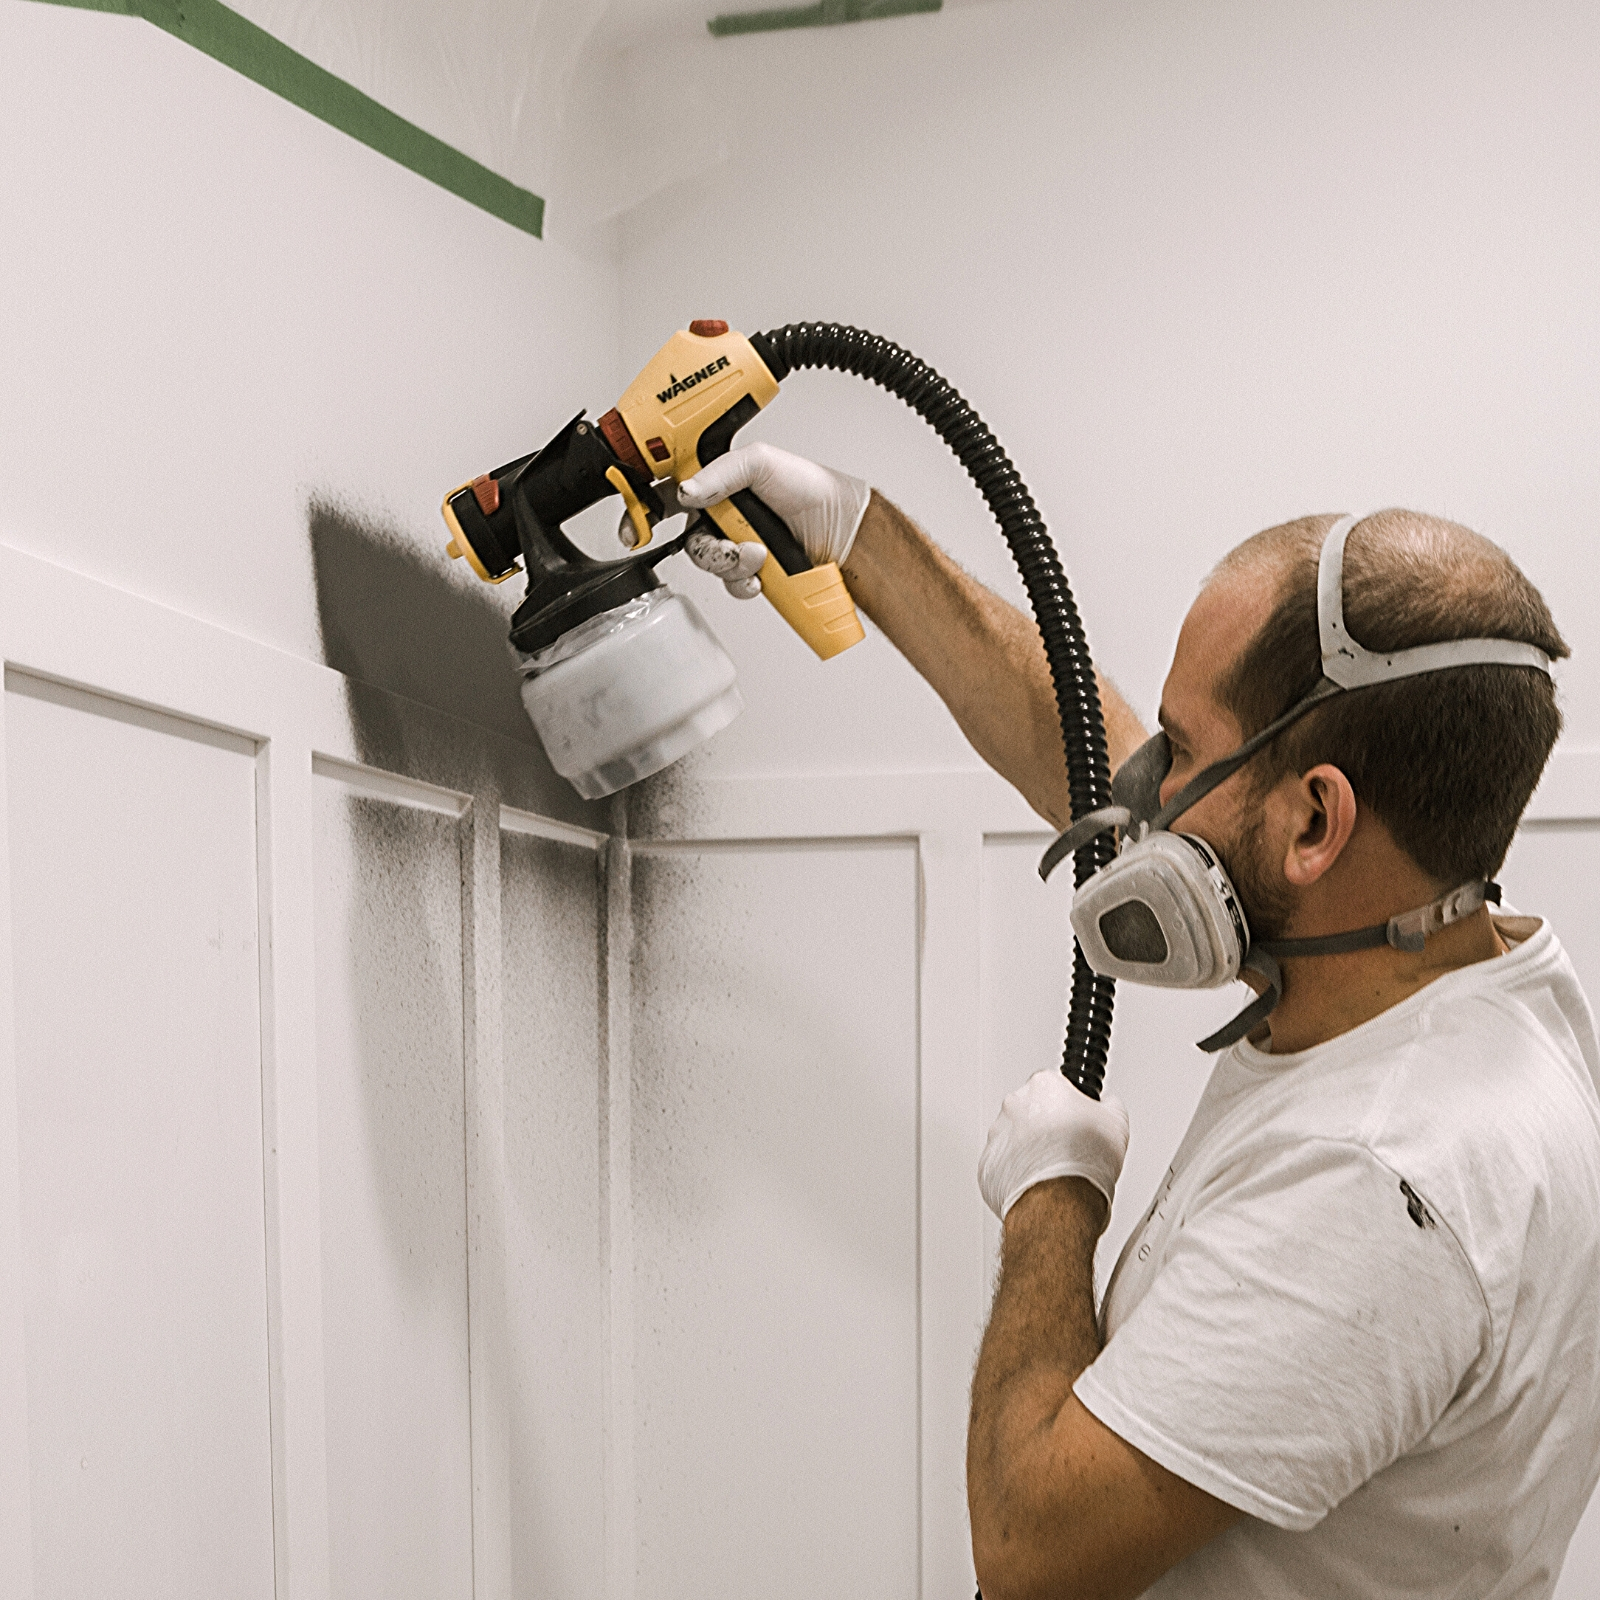 using the horizontal vs. vertical spray with a paint sprayer